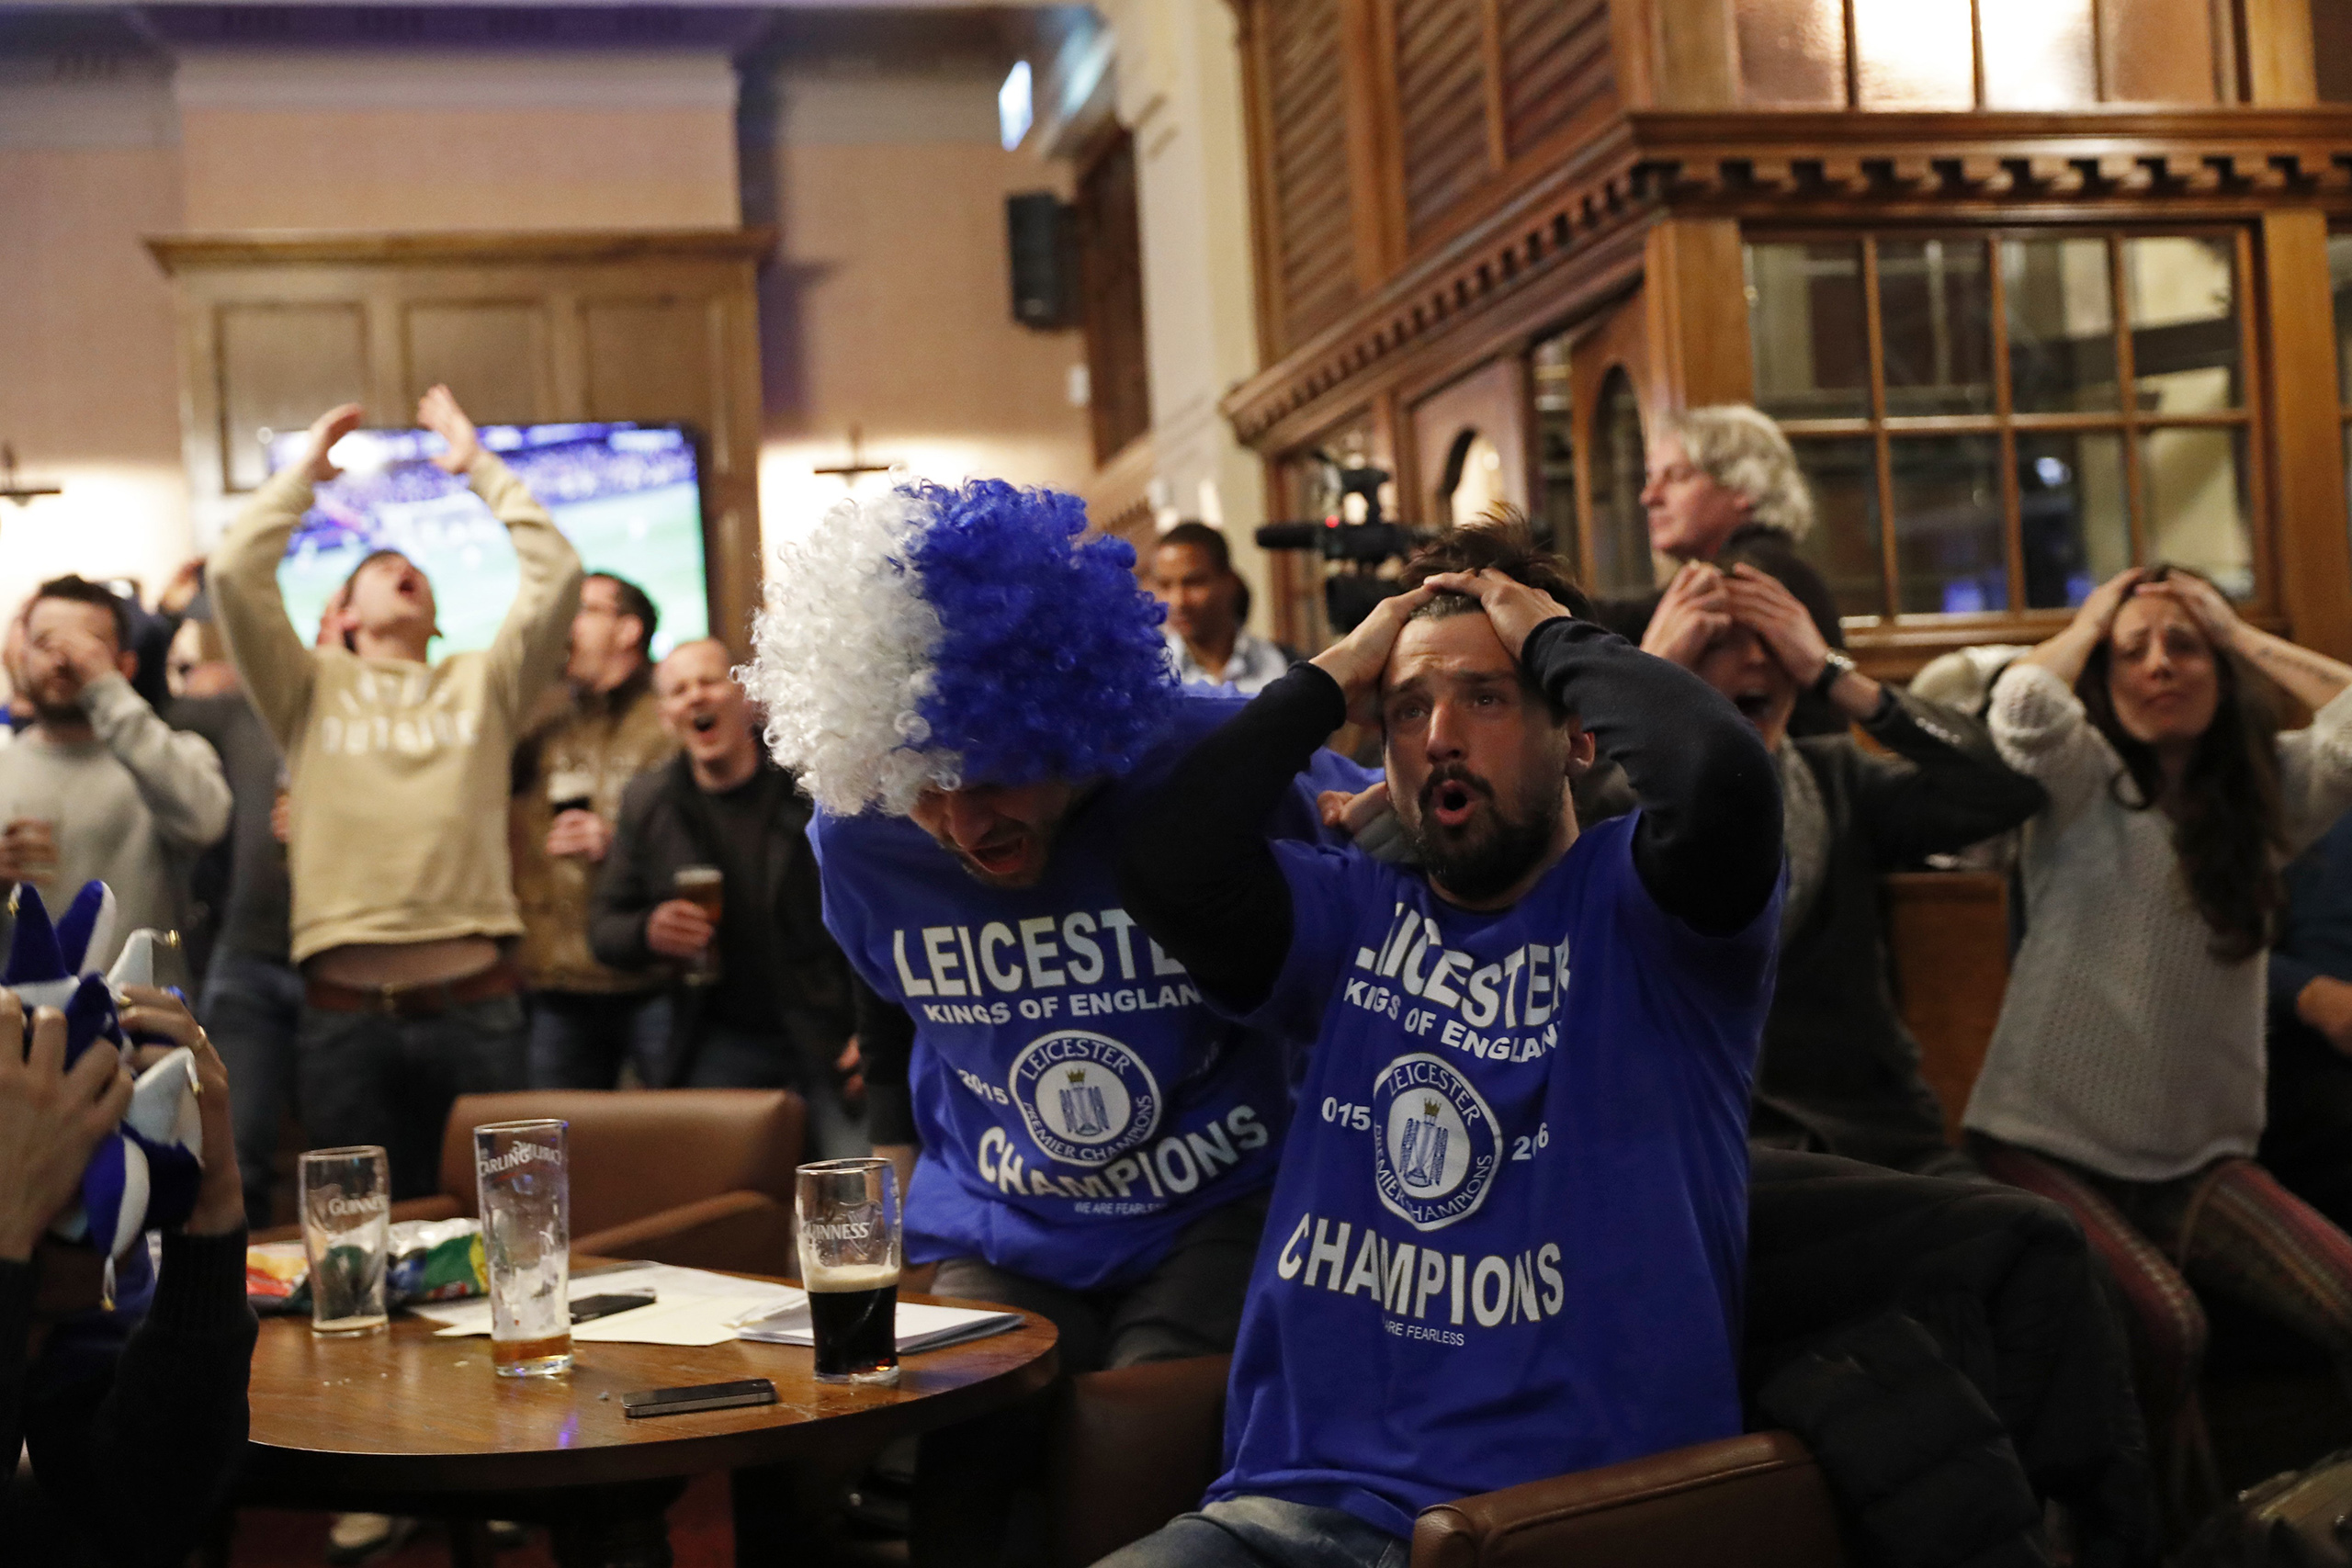 Leicester City fans watch the English Premier League match between Chelsea and Tottenham Hotspur at a pub in Leicester, eastern England, May 2, 2016. (Eddie Keogh—Reuters)